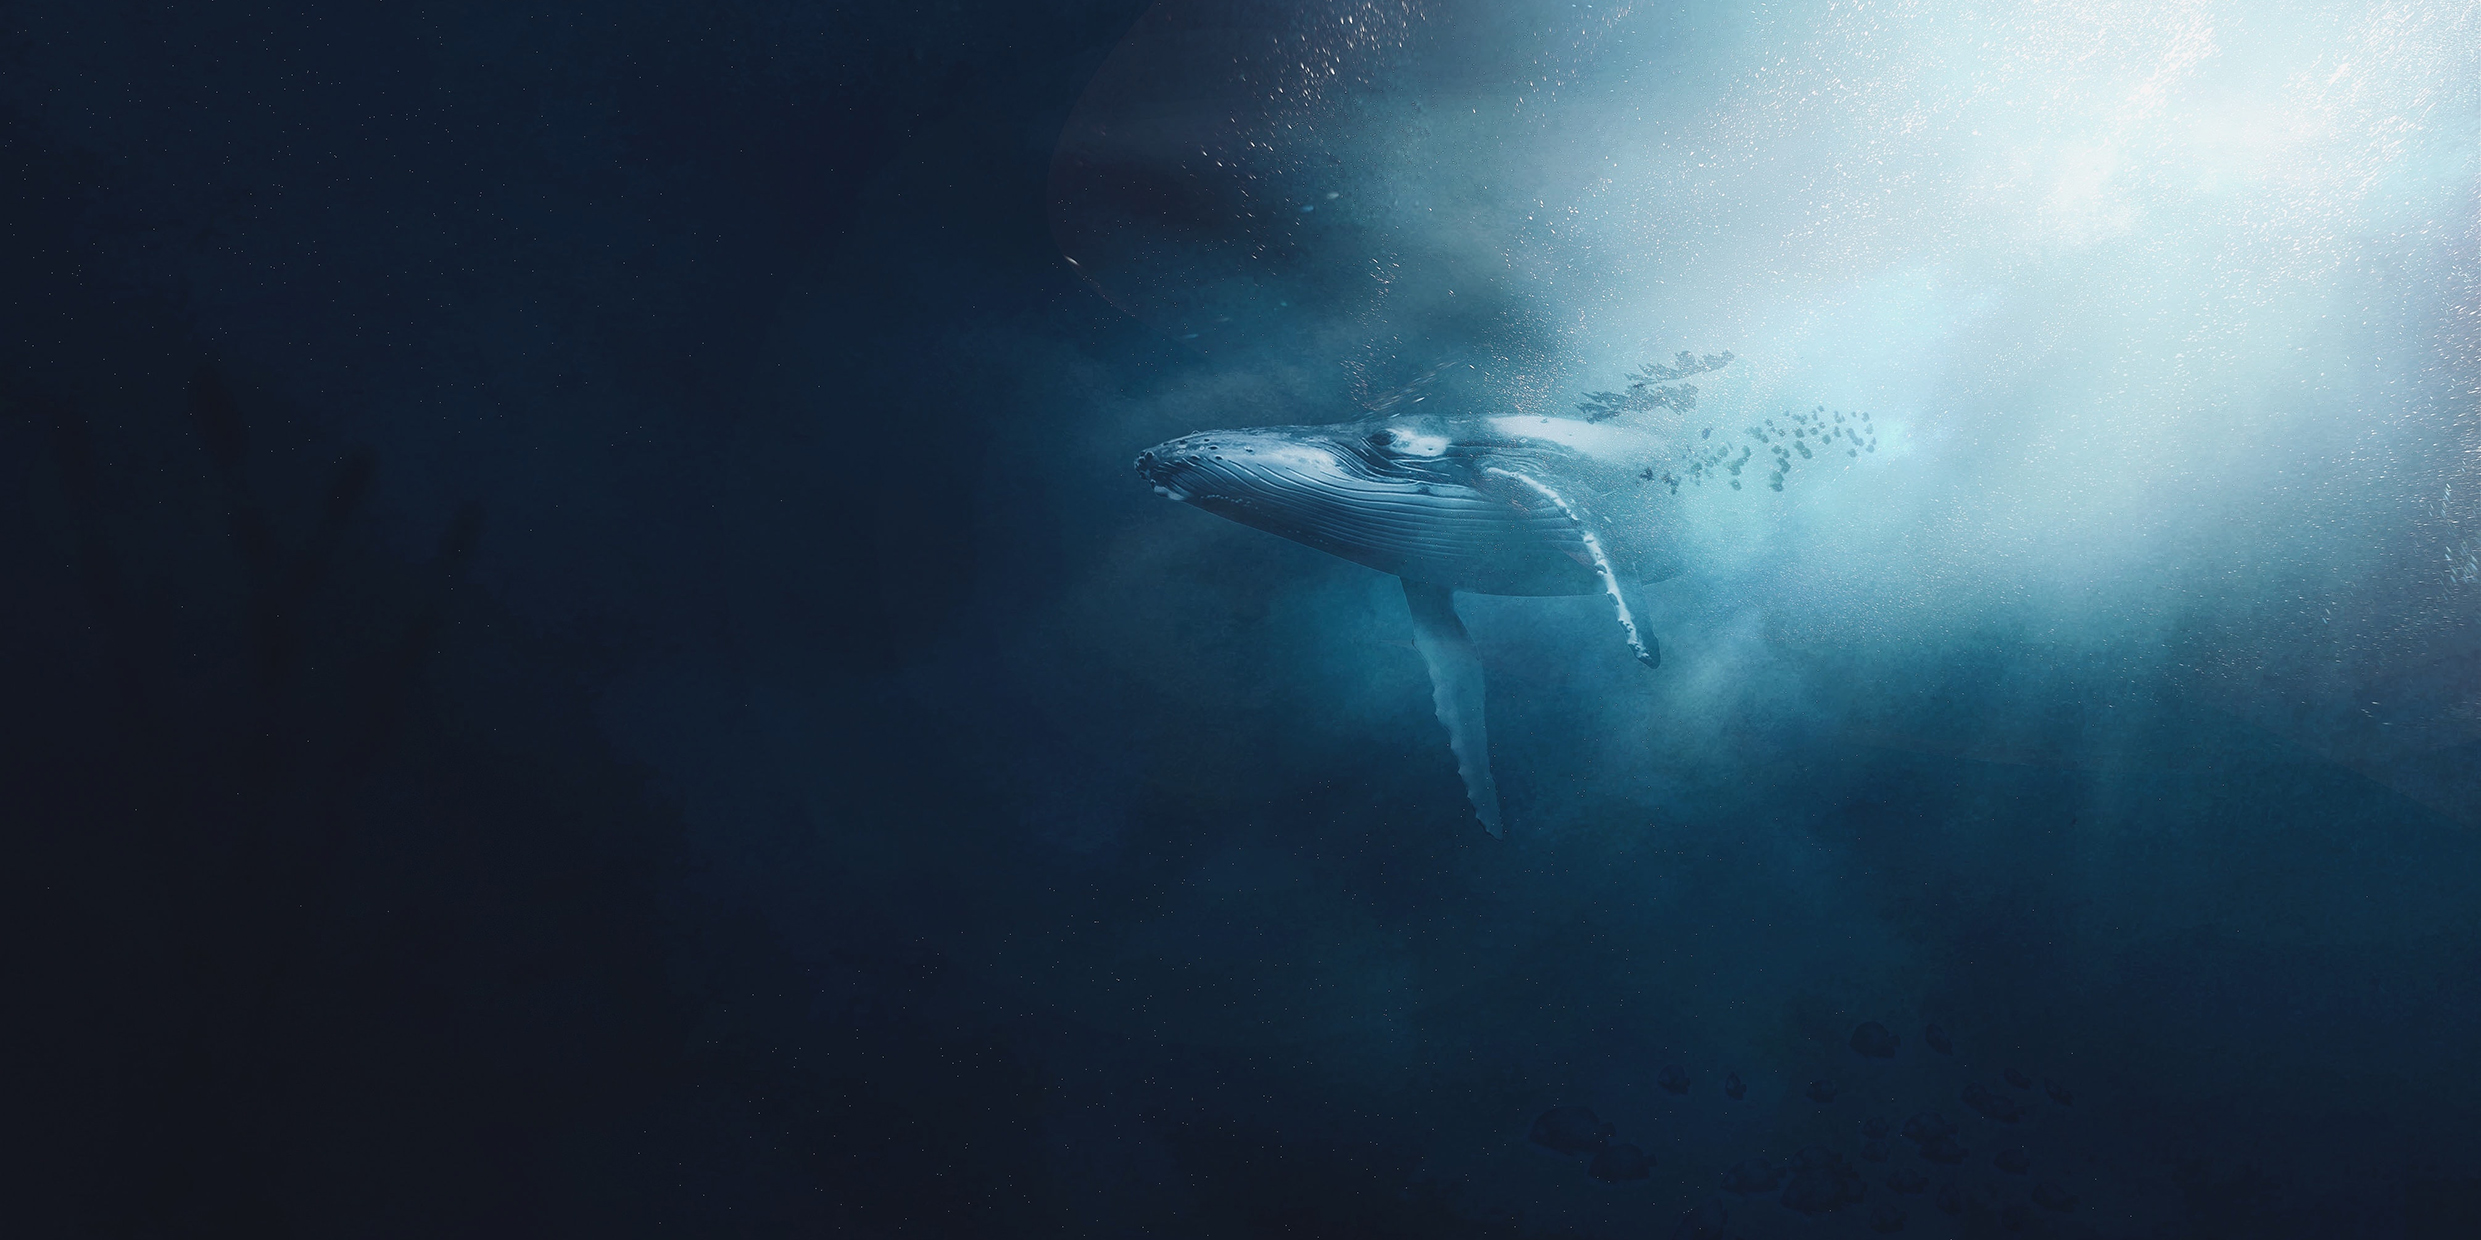 The whale’s tale stirs imaginations